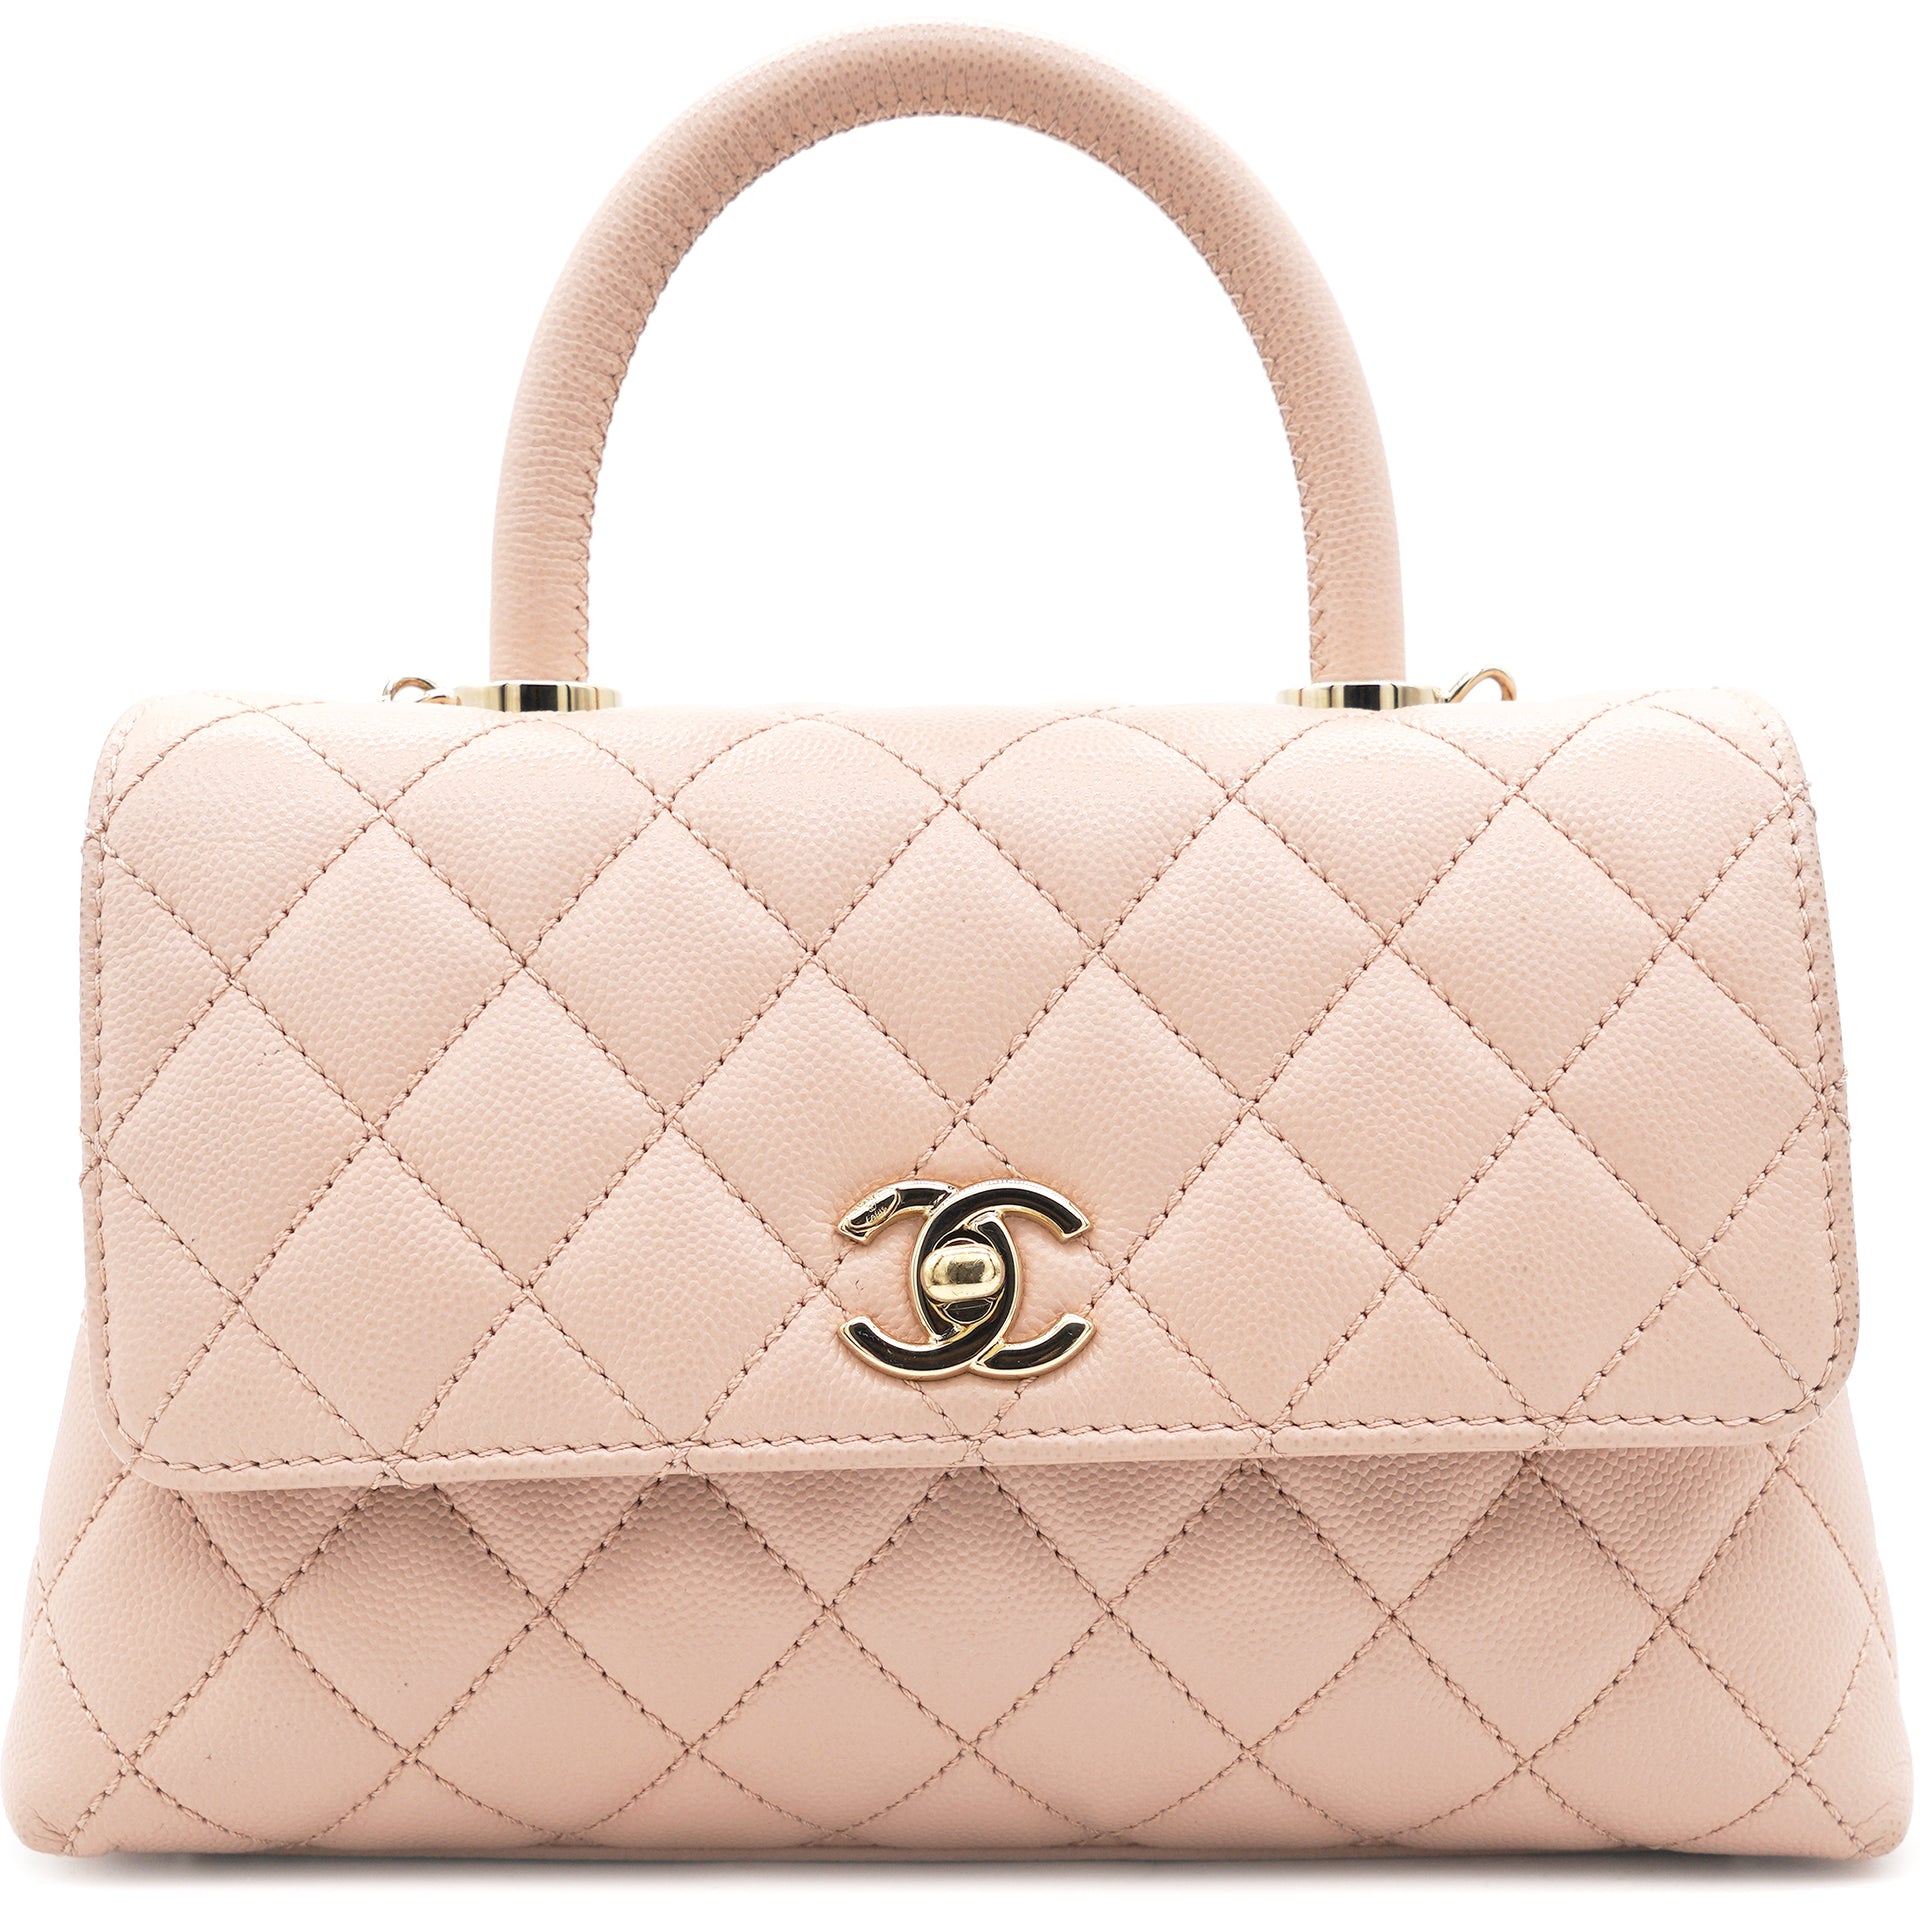 CHANEL Old Mini  New Small Coco Handle Flap Bag Pink Caviar 22P  NEW   eBay